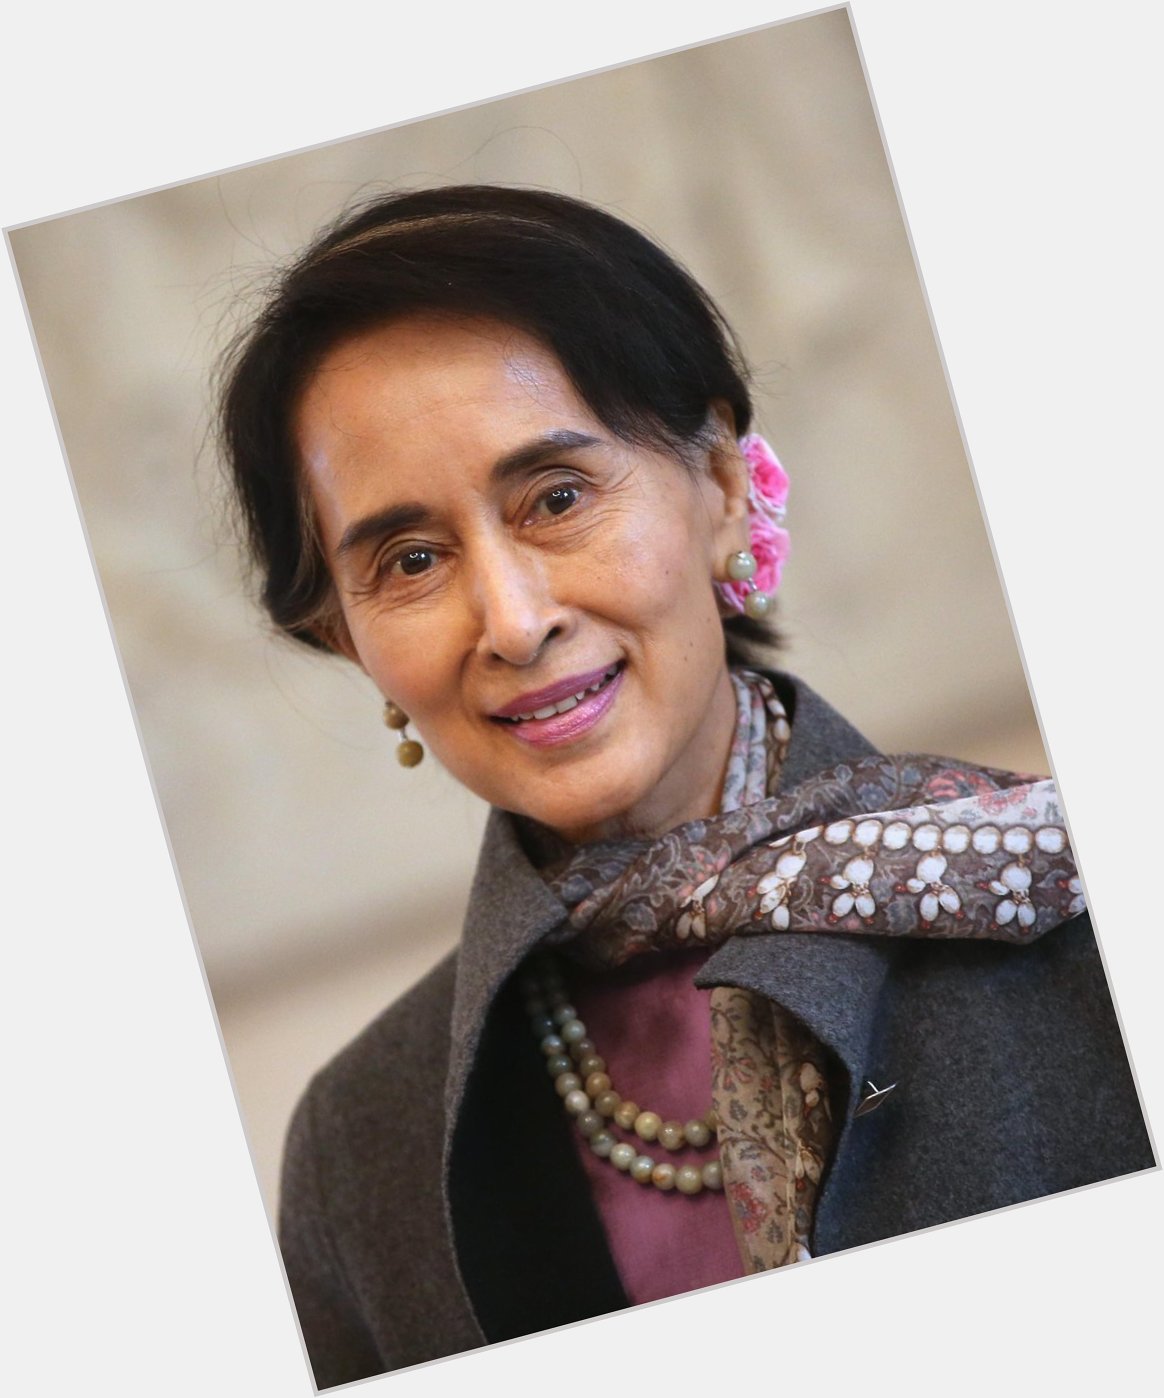 Happy birthday, Aung San Suu Kyi!
You have been an inspiration globally and a loving mother to Bhutan! :) 